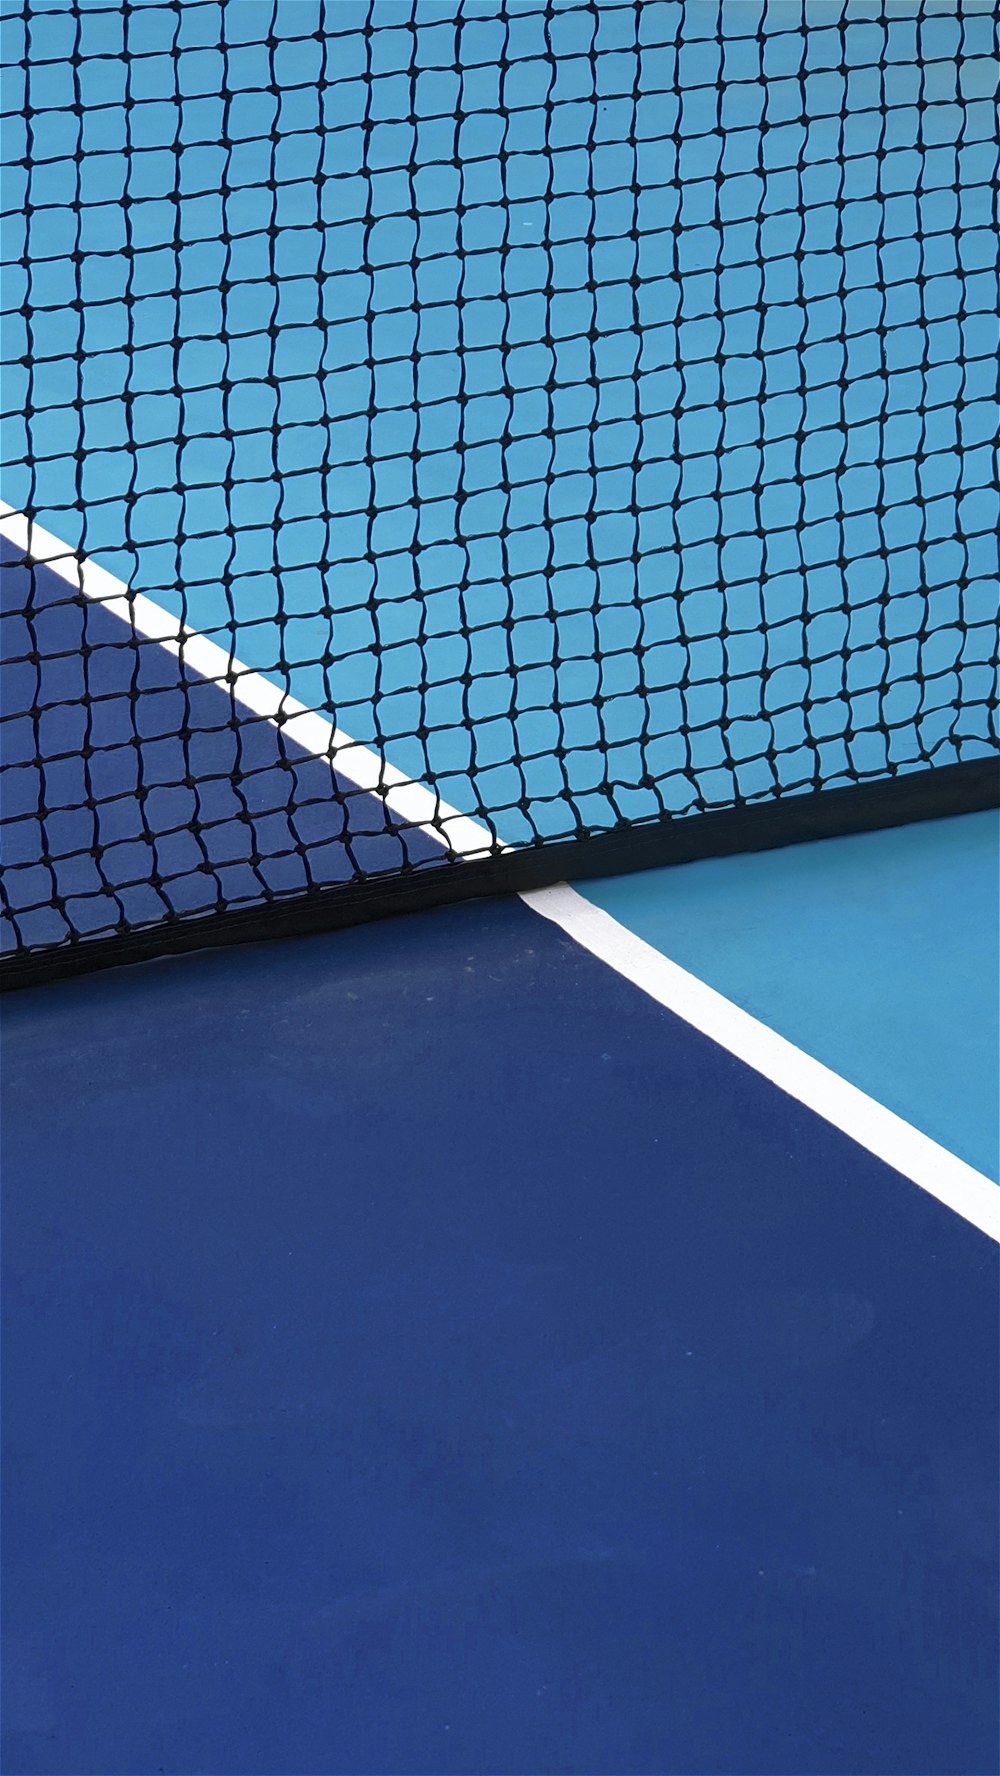 a blue tennis court with a white line on it